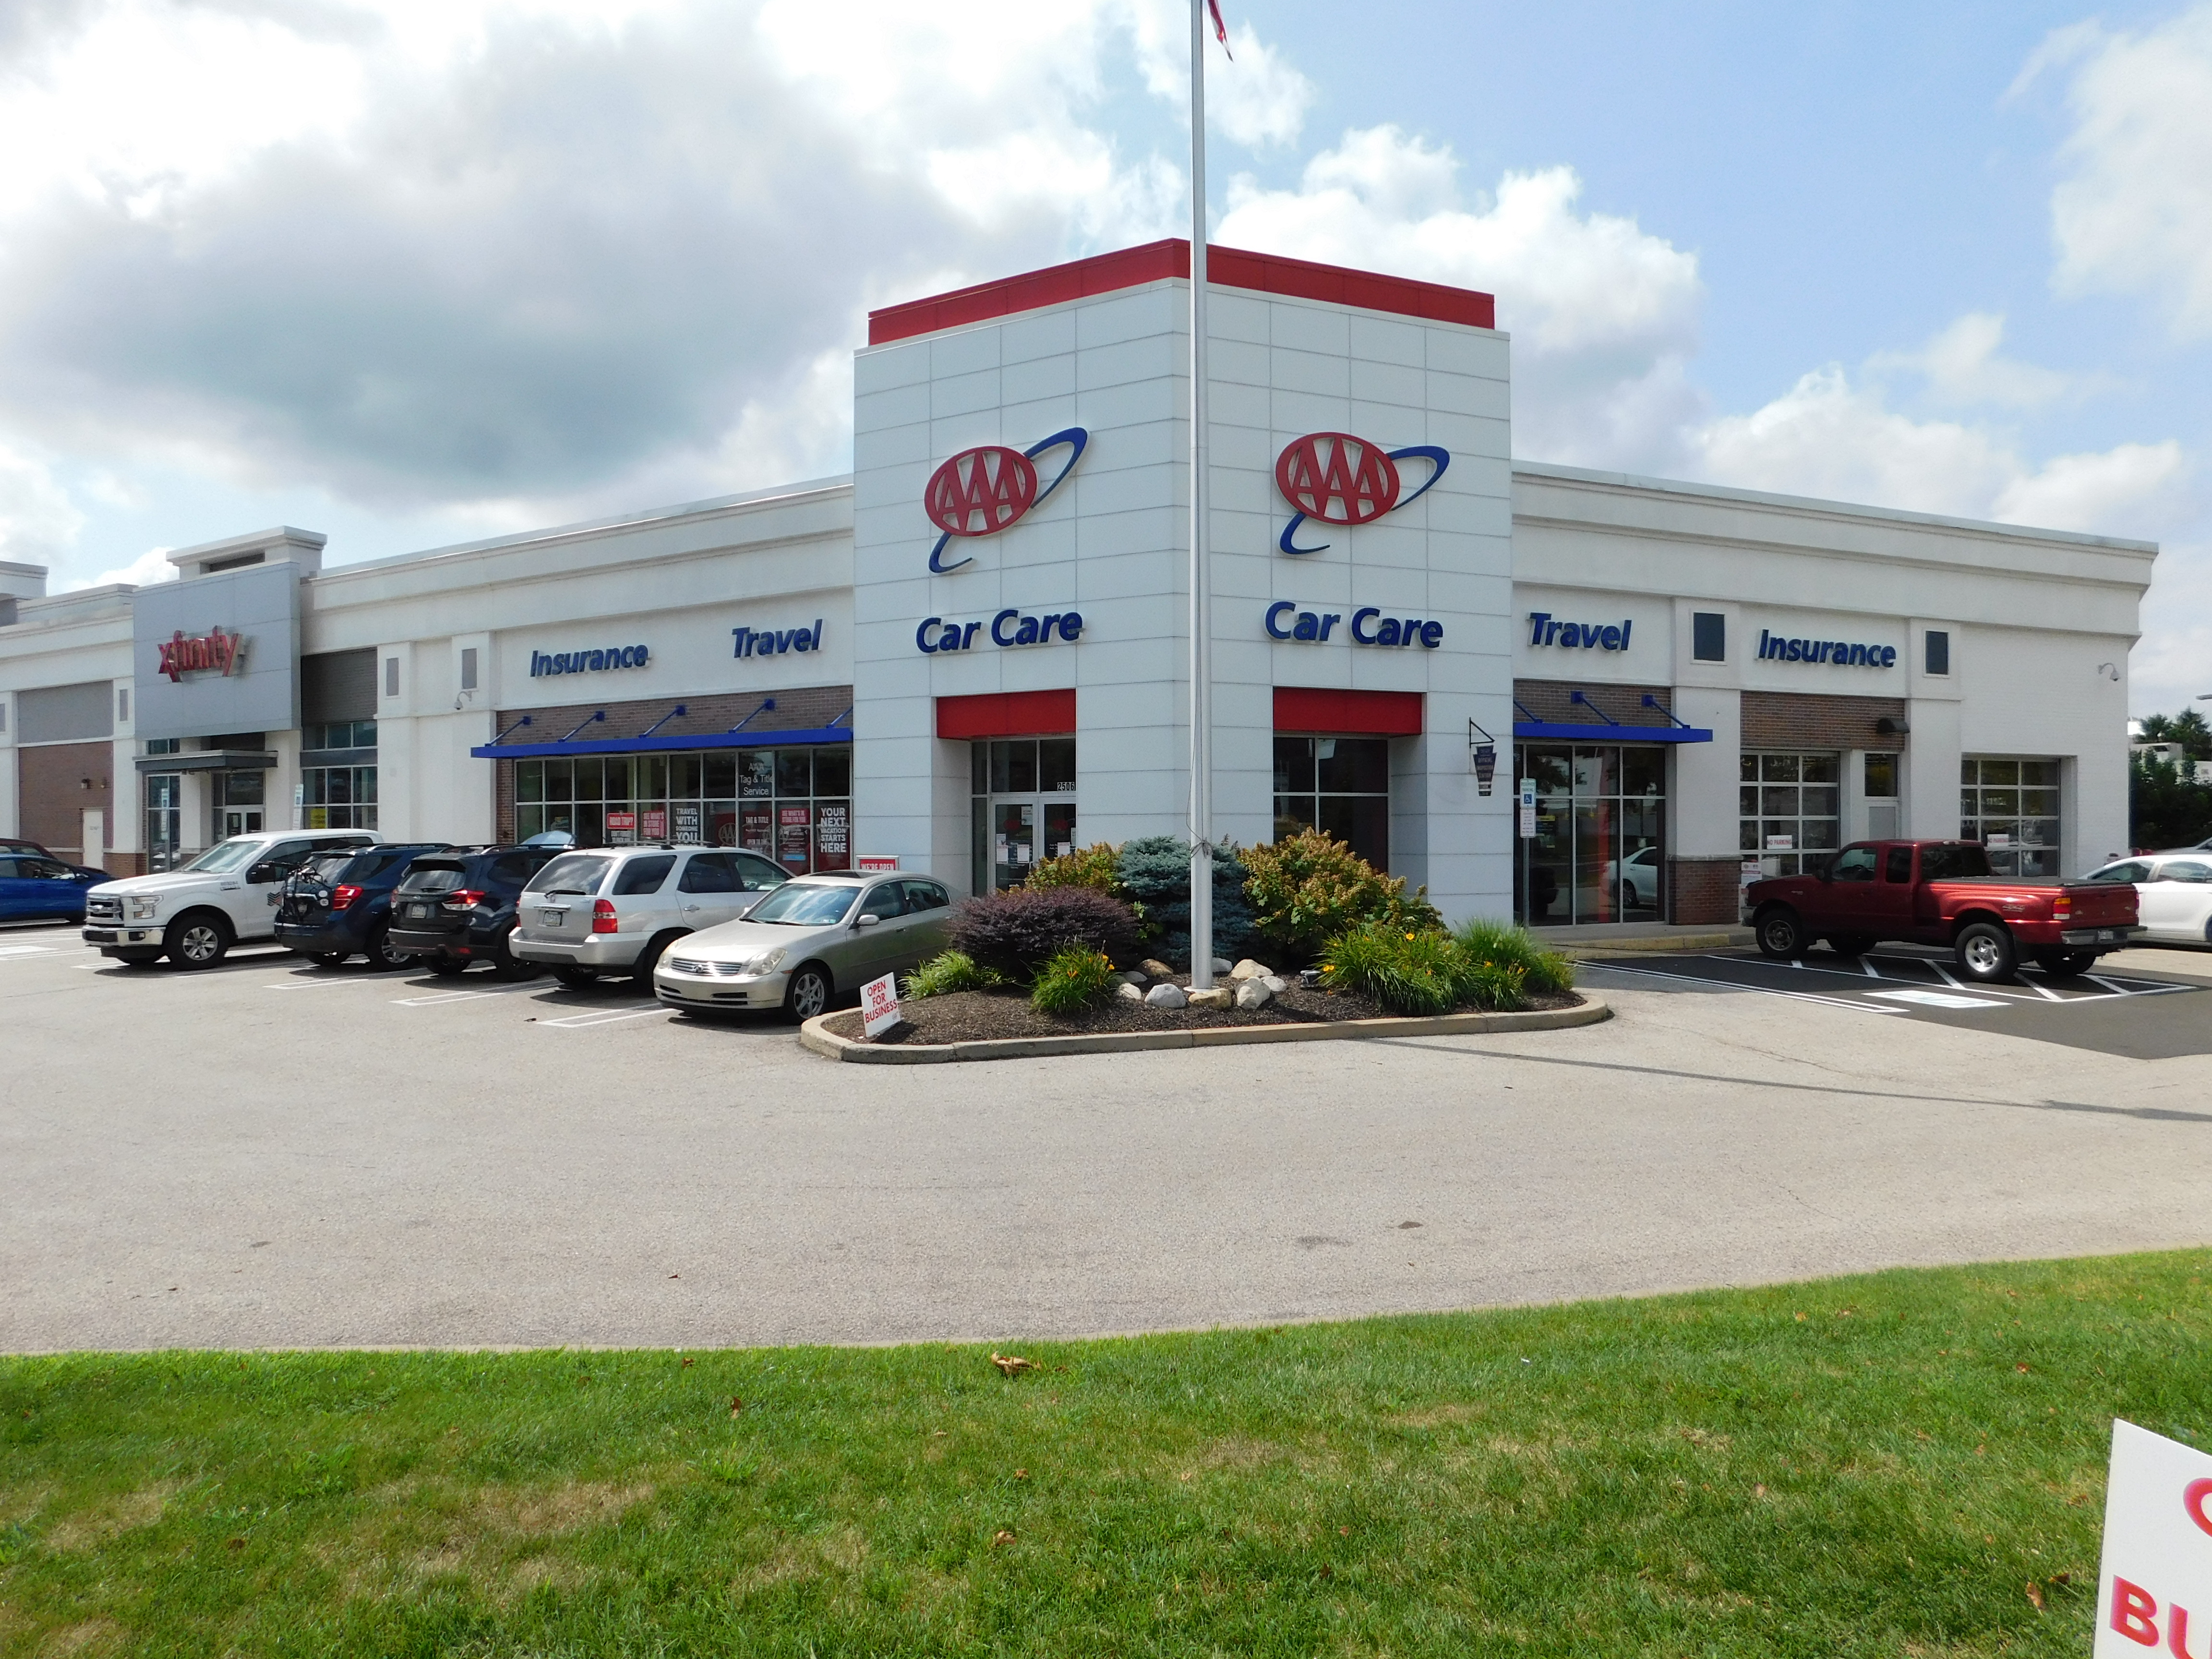 AAA Willow Grove Car Care Insurance Travel Center Photo